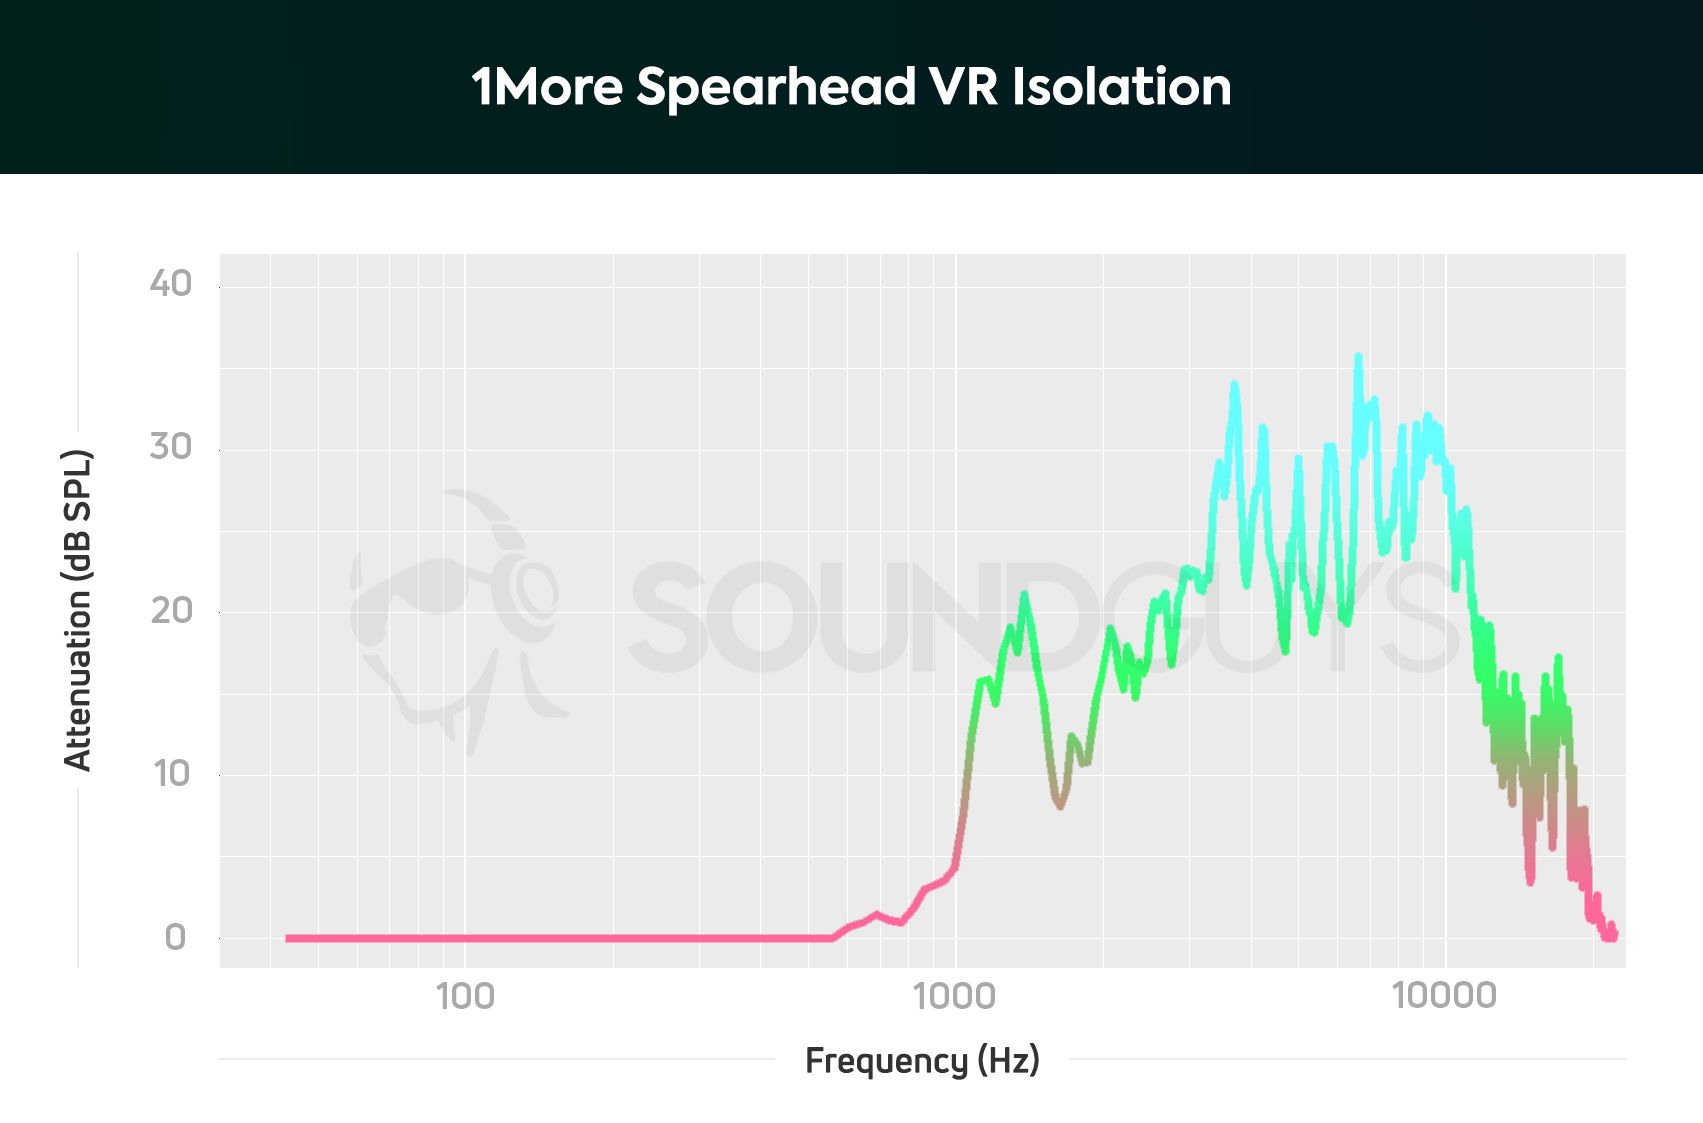 an isolation chart for the 1More Spearhead VR, which shows very average attenuation for a gaming headset.